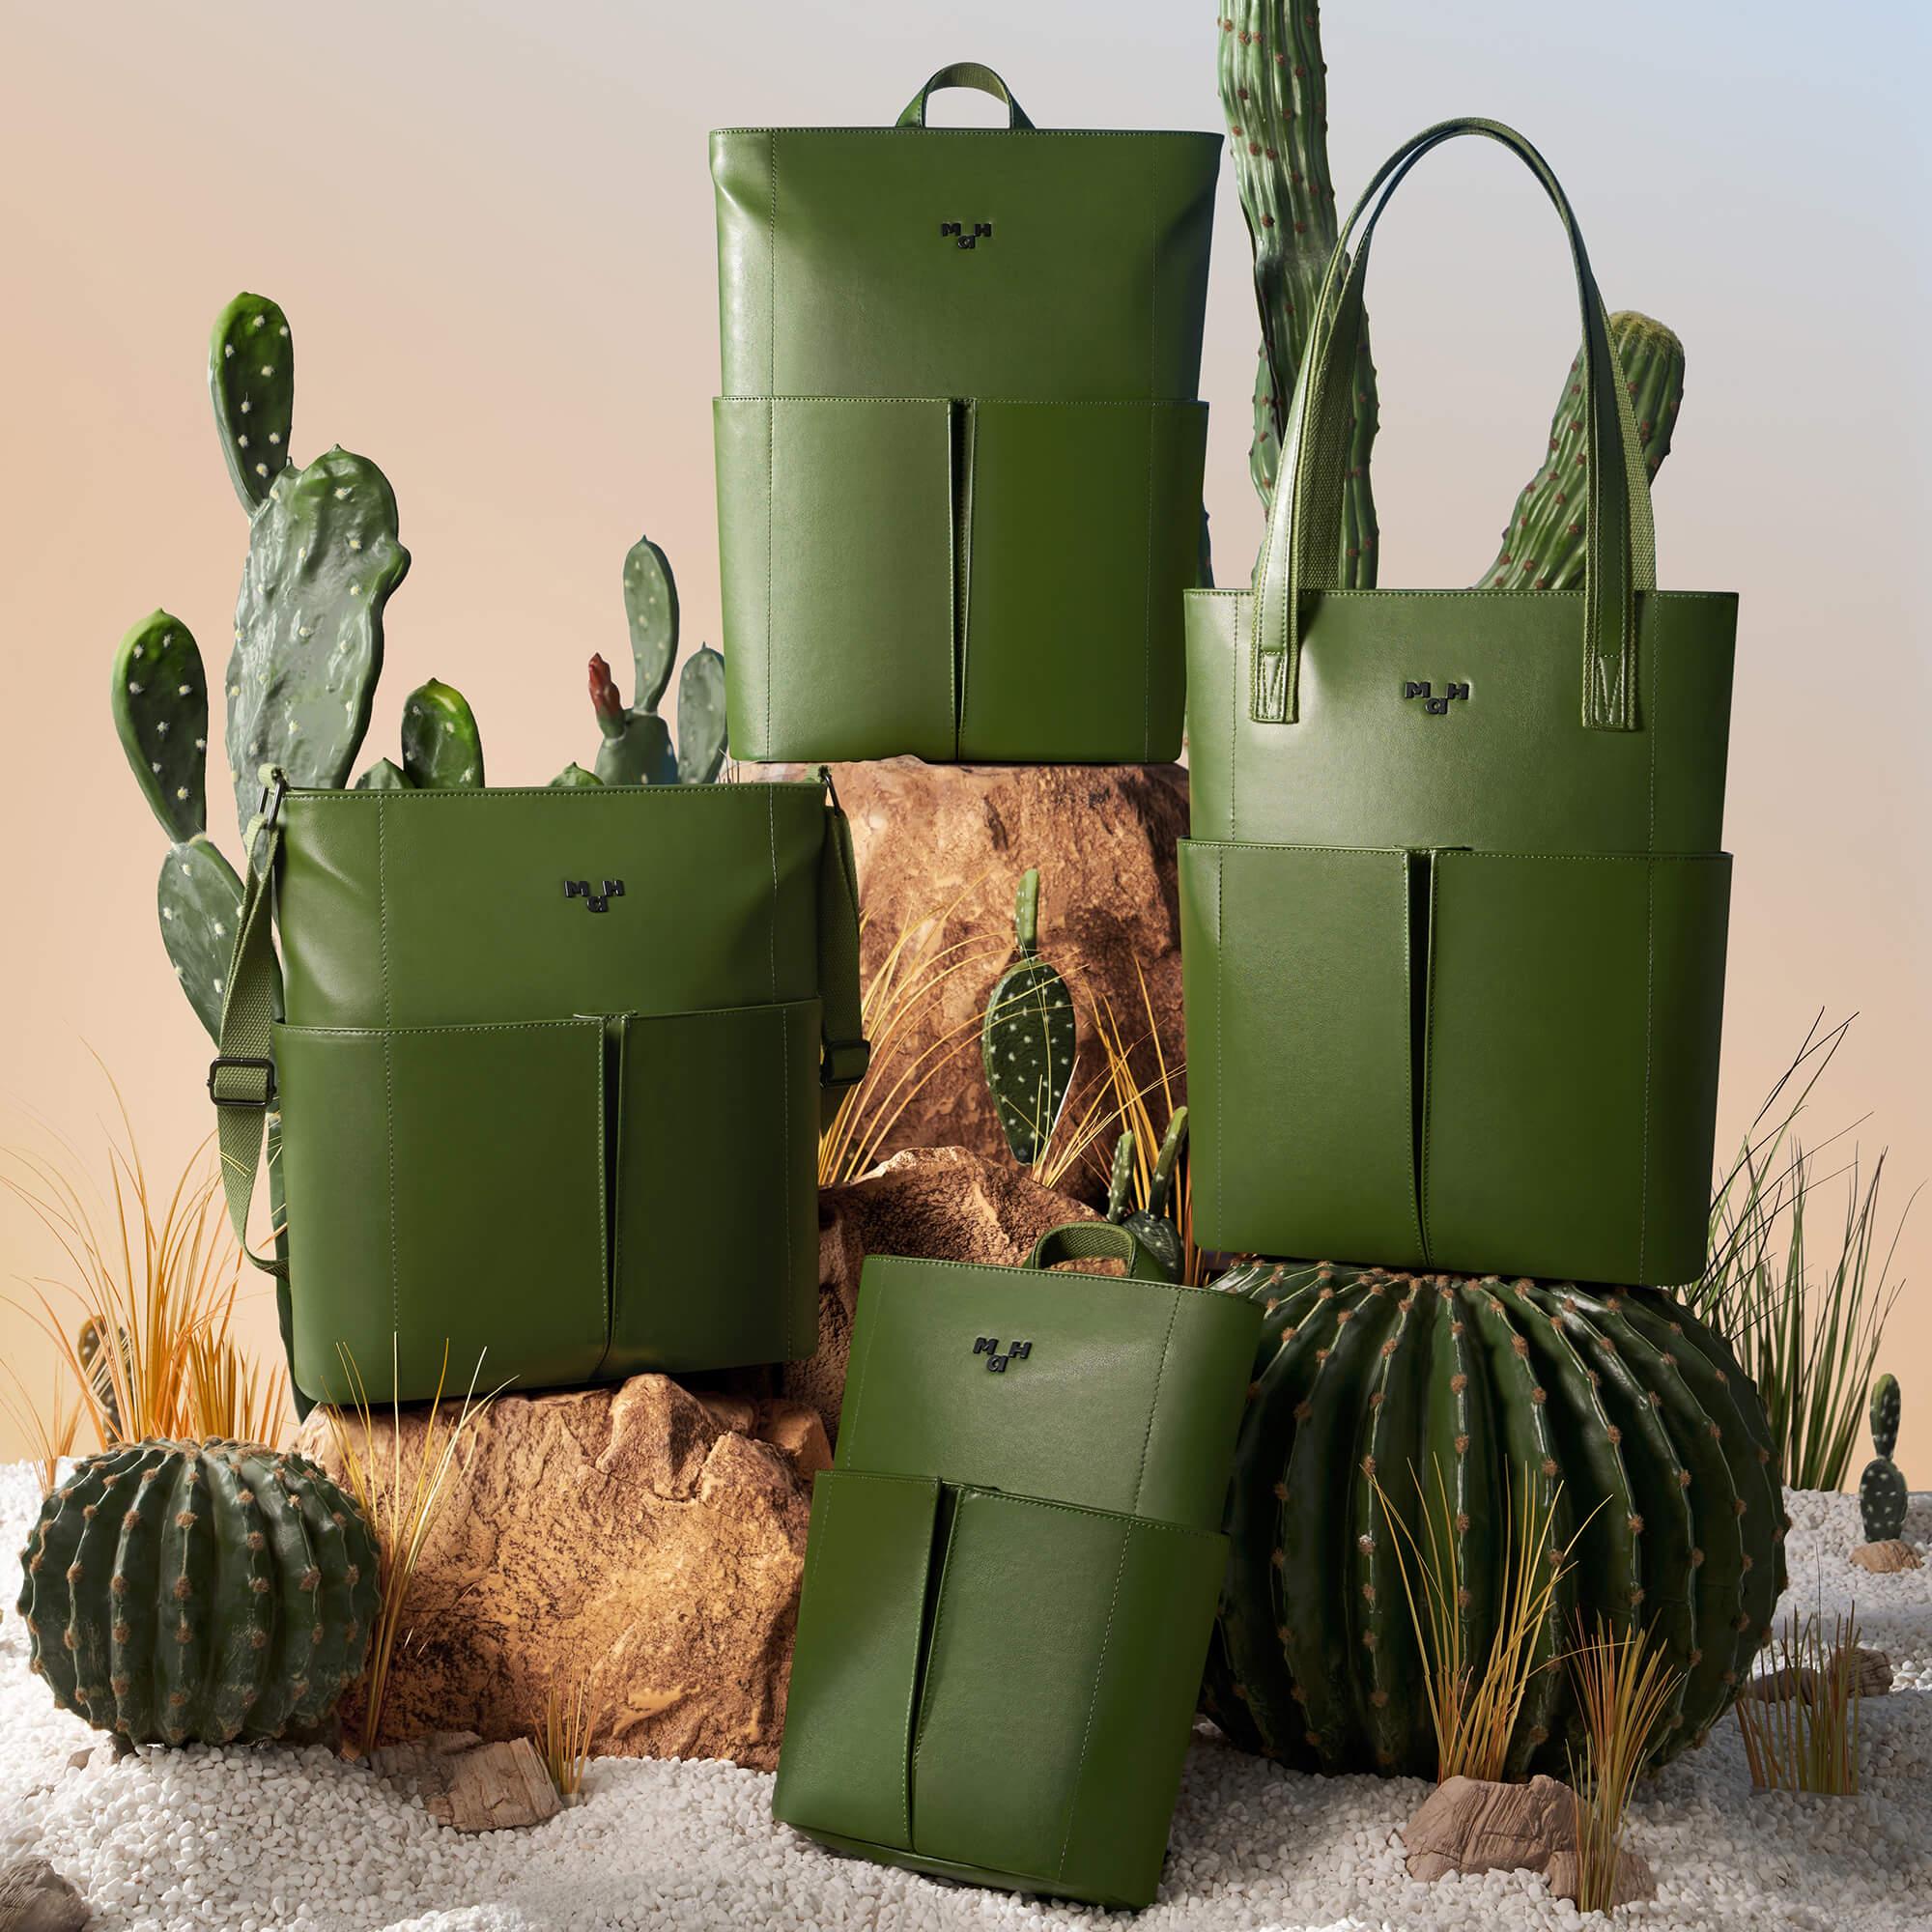 Cactus Leather Sling Bag